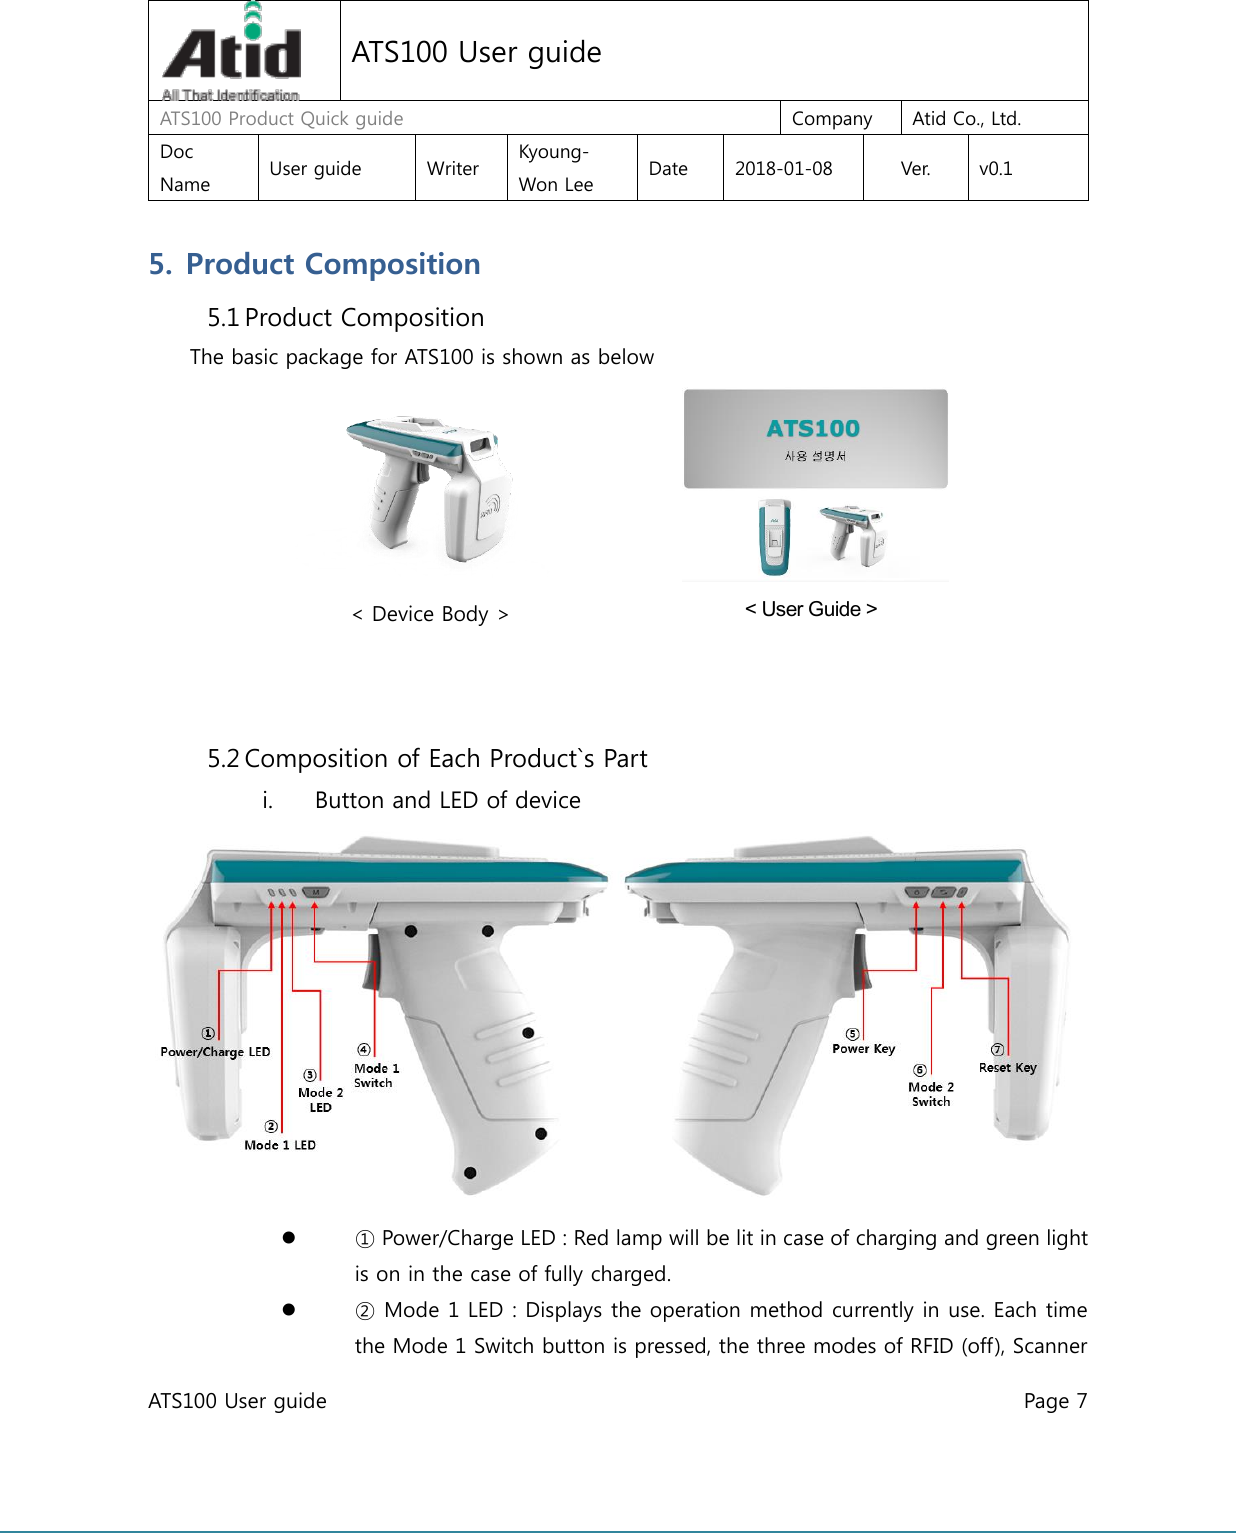  ATS100 User guide    Page 7      ATS100 User guide ATS100 Product Quick guide  Company  Atid Co., Ltd. Doc Name  User guide  Writer  Kyoung-Won Lee  Date  2018-01-08  Ver.  v0.1 5. Product Composition 5.1 Product Composition The basic package for ATS100 is shown as below    &lt; Device Body &gt;      &lt; User Guide &gt;    5.2 Composition of Each Product`s Part i. Button and LED of device   ① Power/Charge LED : Red lamp will be lit in case of charging and green light is on in the case of fully charged.  ② Mode 1 LED : Displays the operation method currently in use. Each time the Mode 1 Switch button is pressed, the three modes of RFID (off), Scanner 